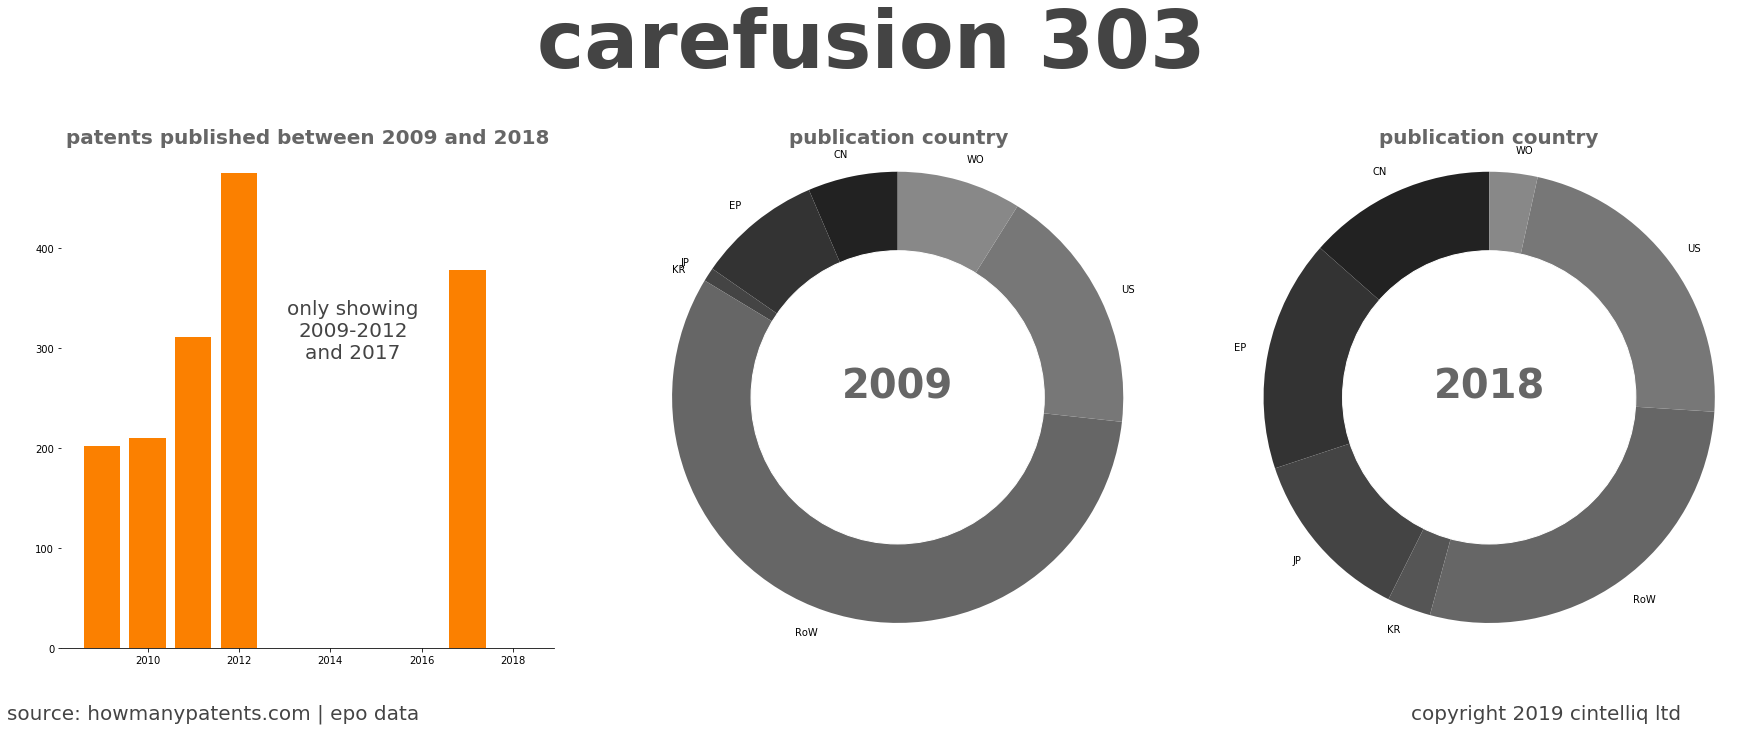 summary of patents for Carefusion 303